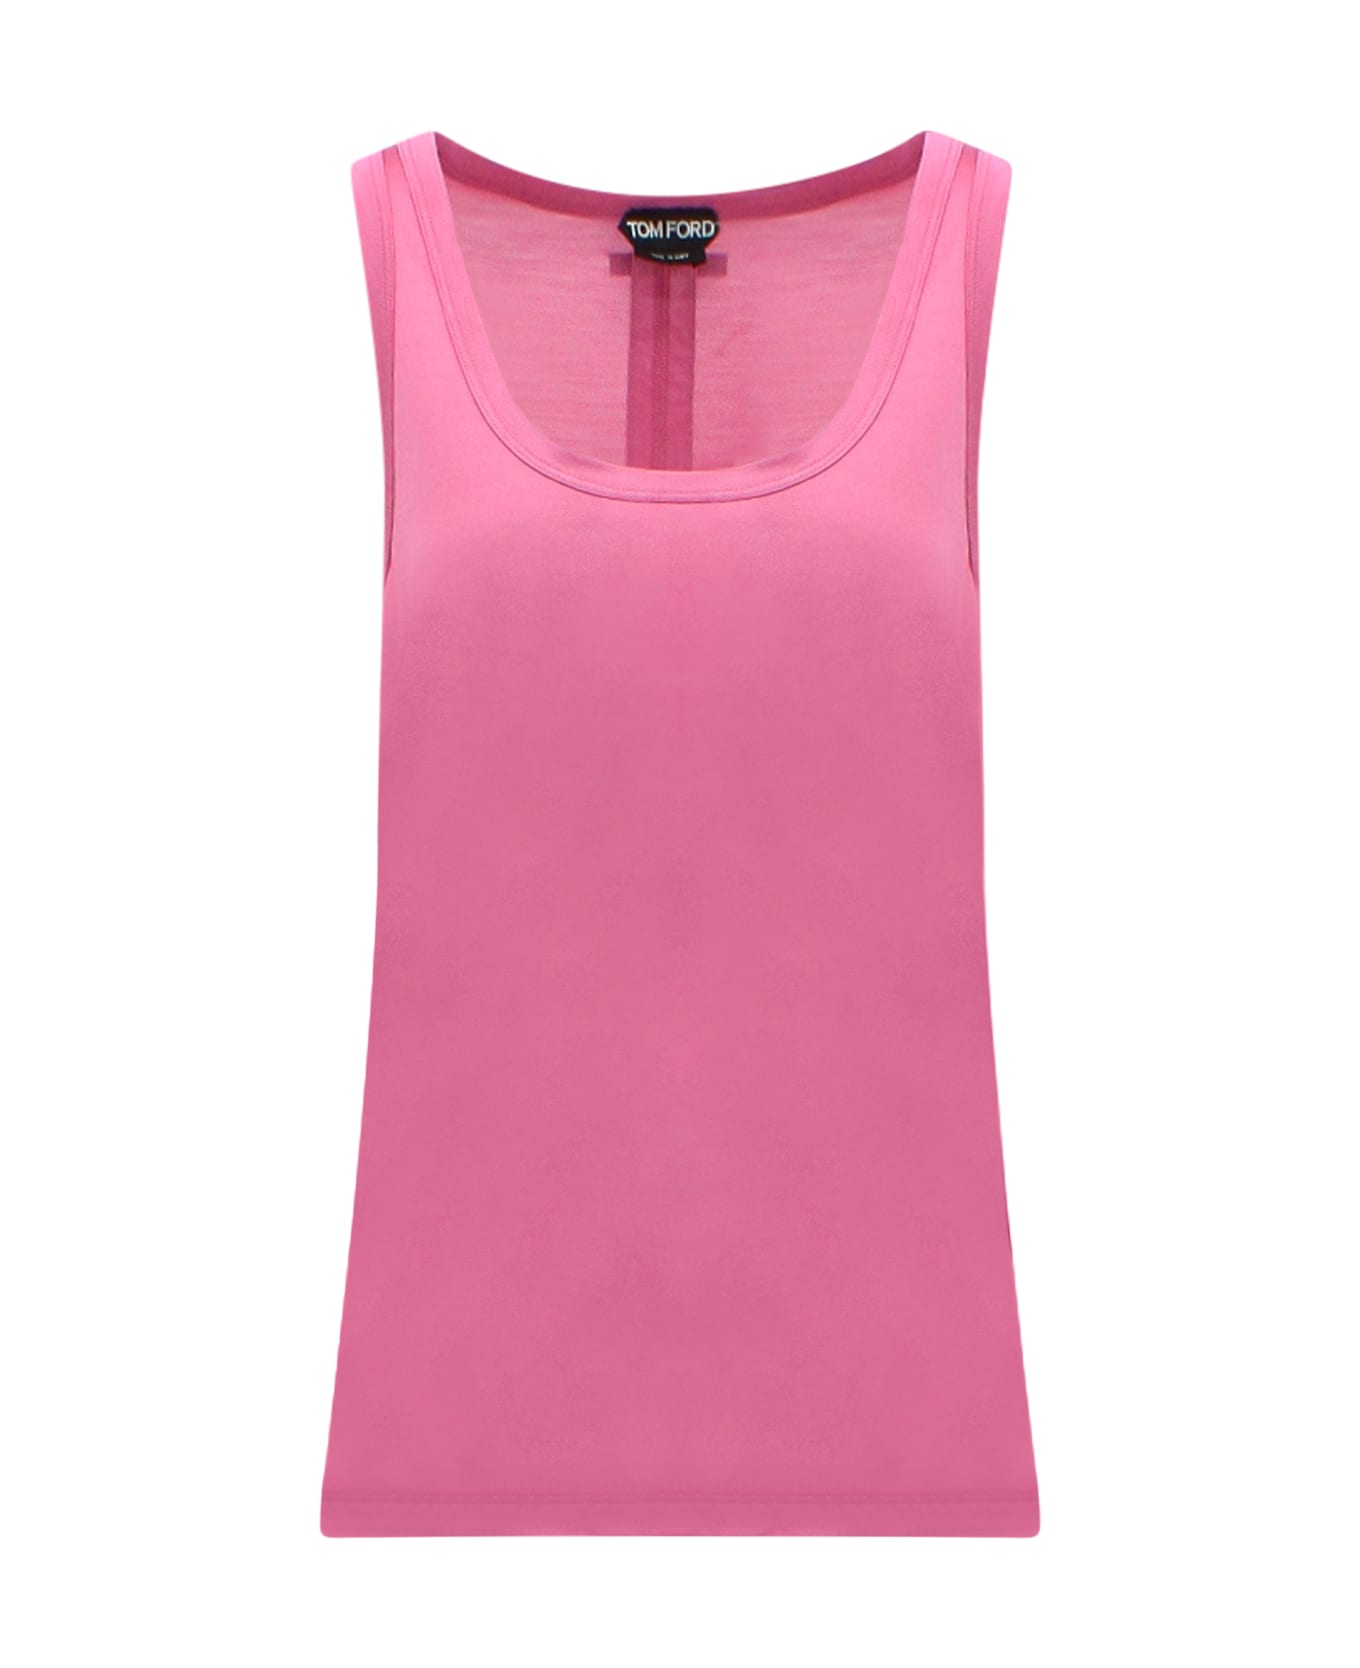 Tom Ford Tank Top - Pink トップス